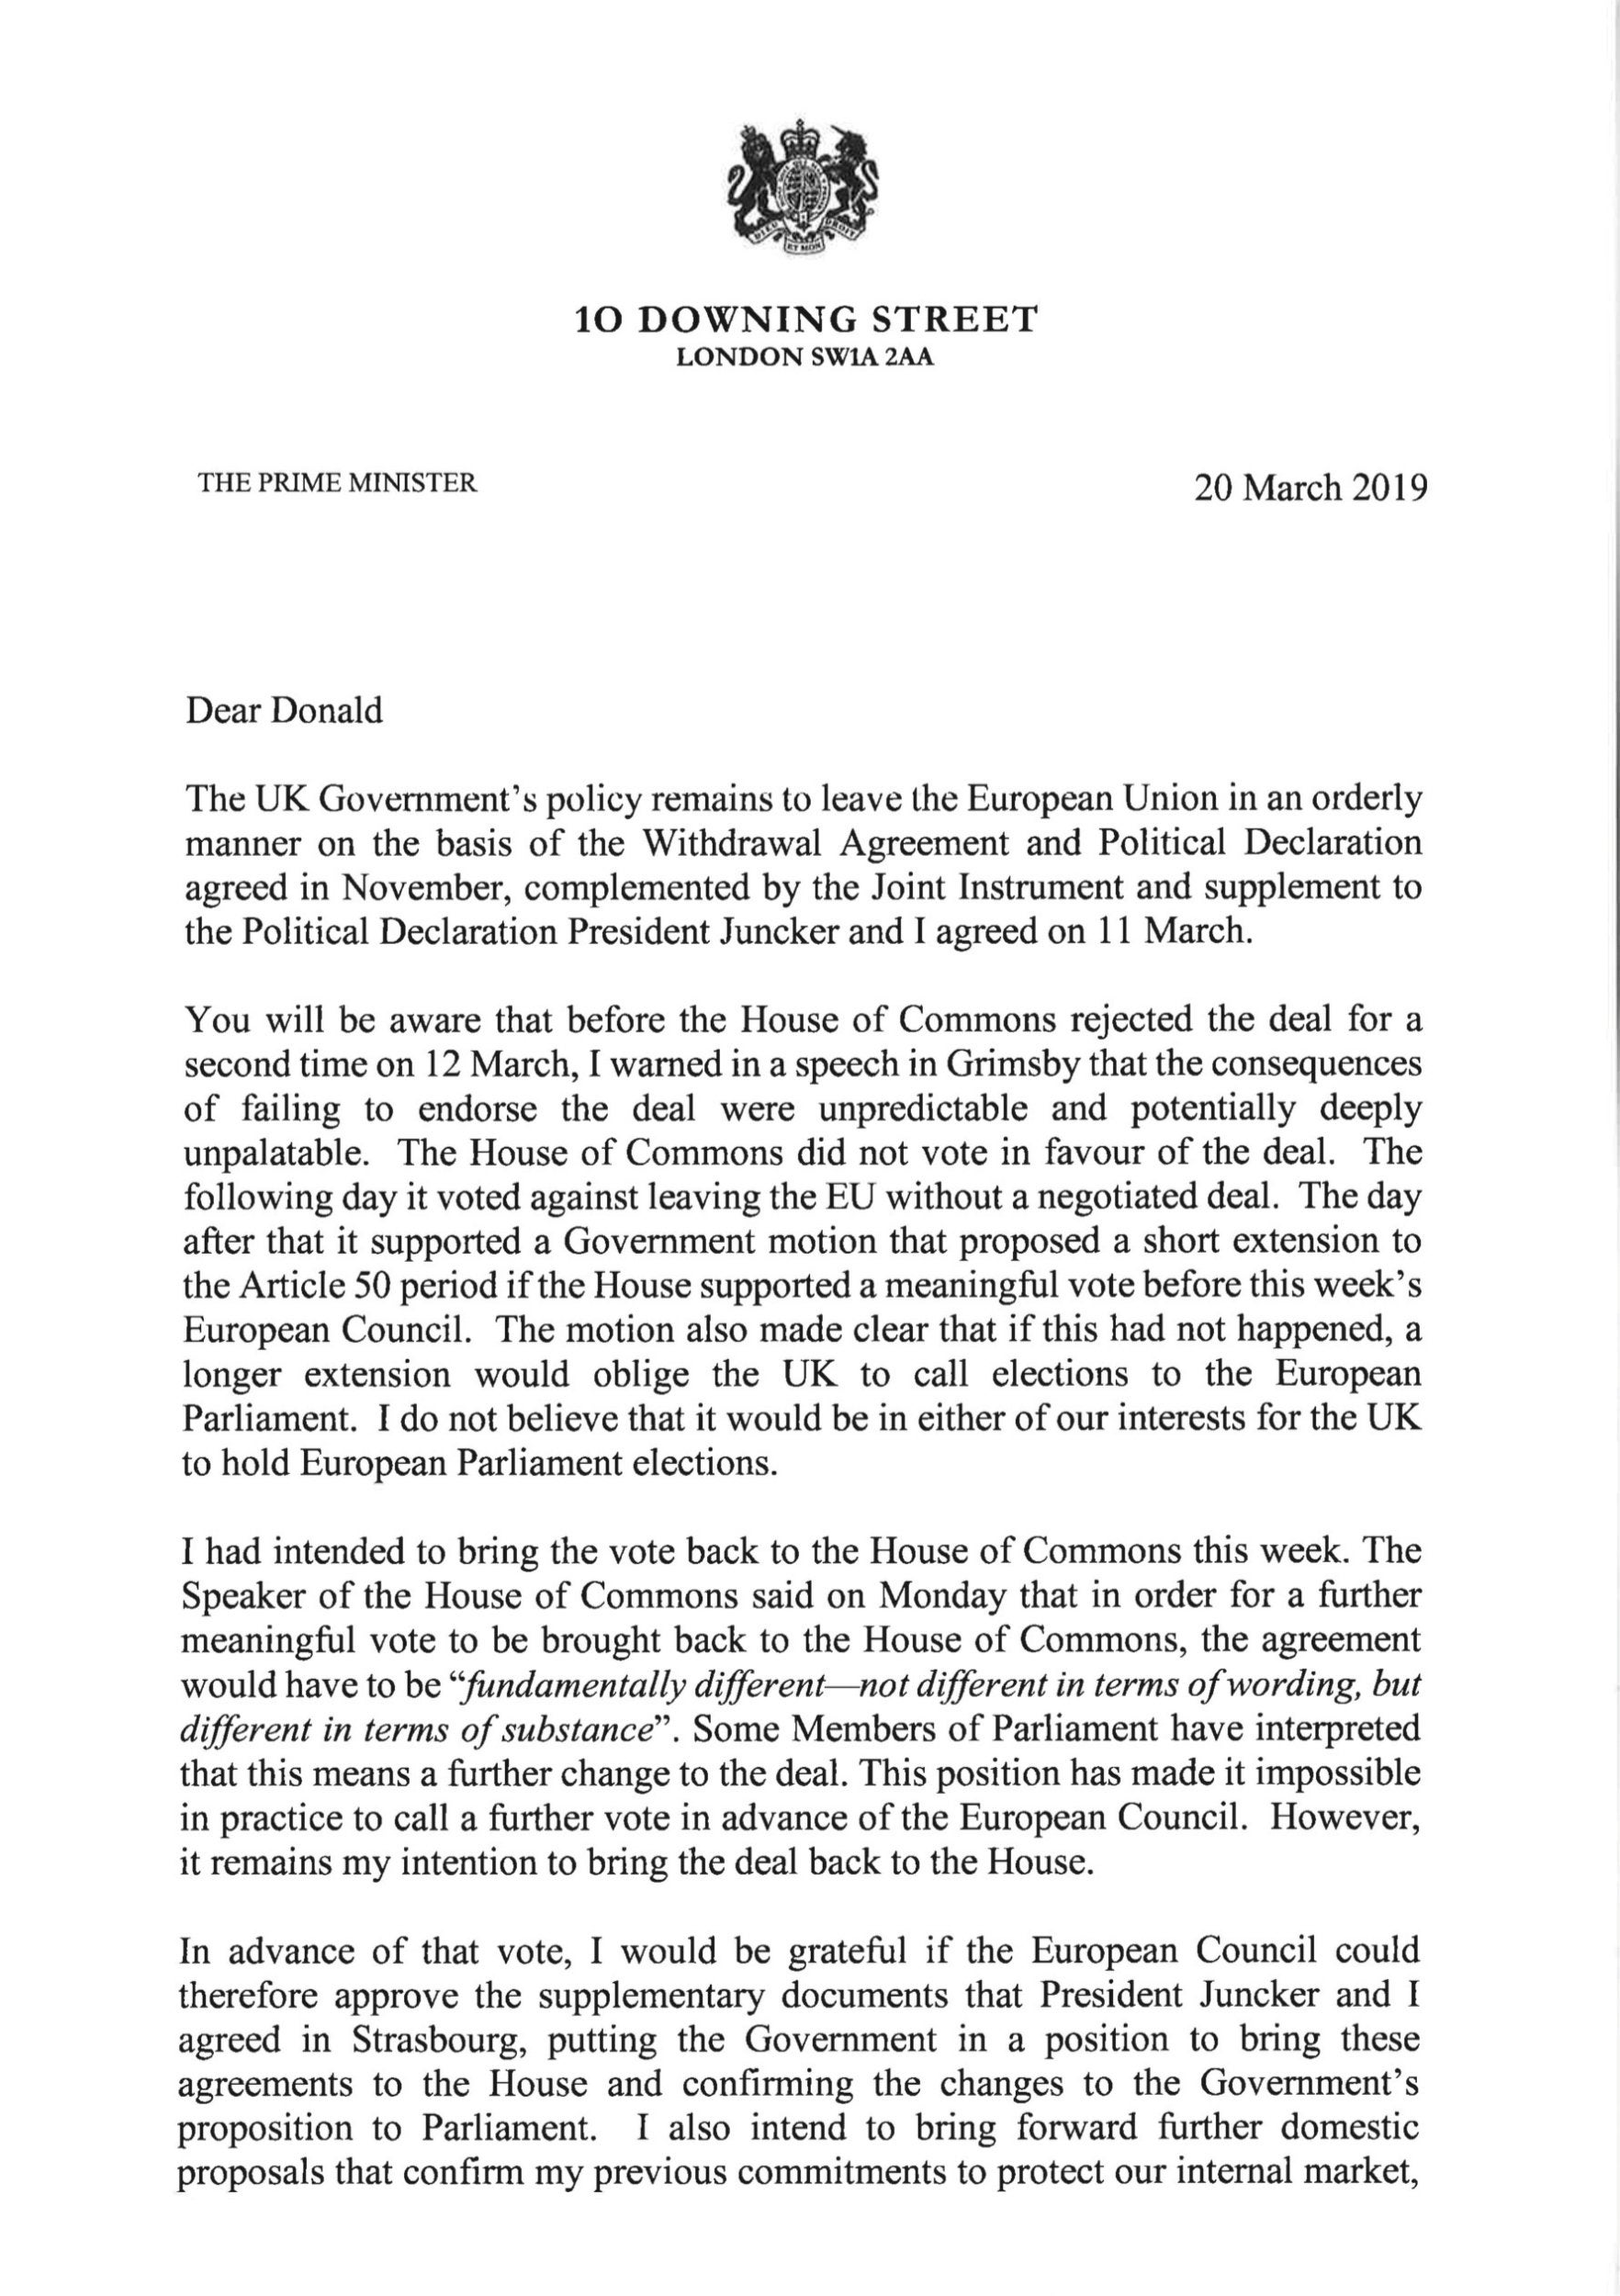 In a letter to Donald Tusk, Theresa May requested a Brexit delay until 30 June